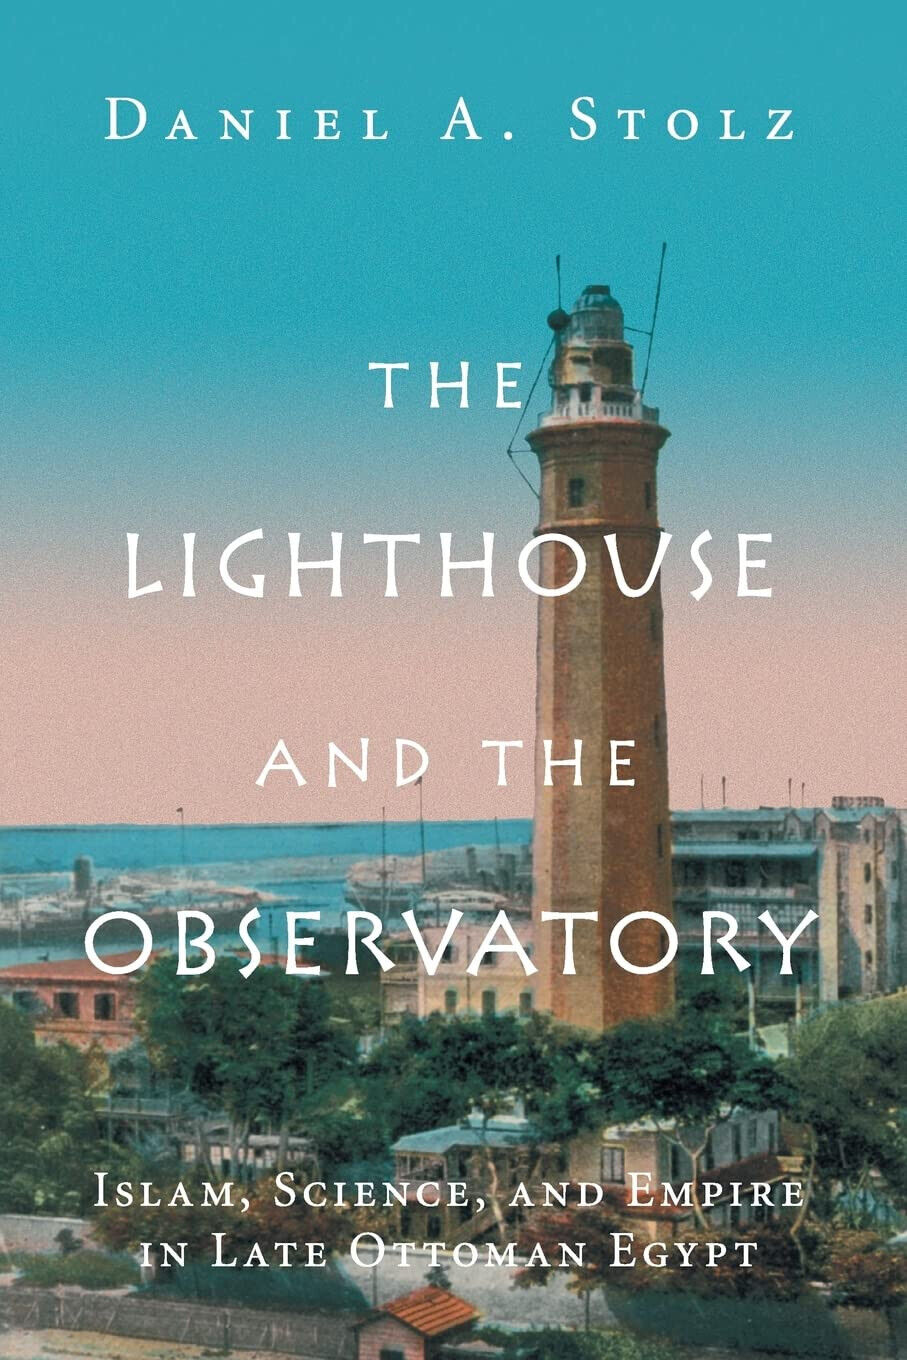 The Lighthouse and the Observatory - Daniel A. Stolz - Cambridge, 2019 libro usato